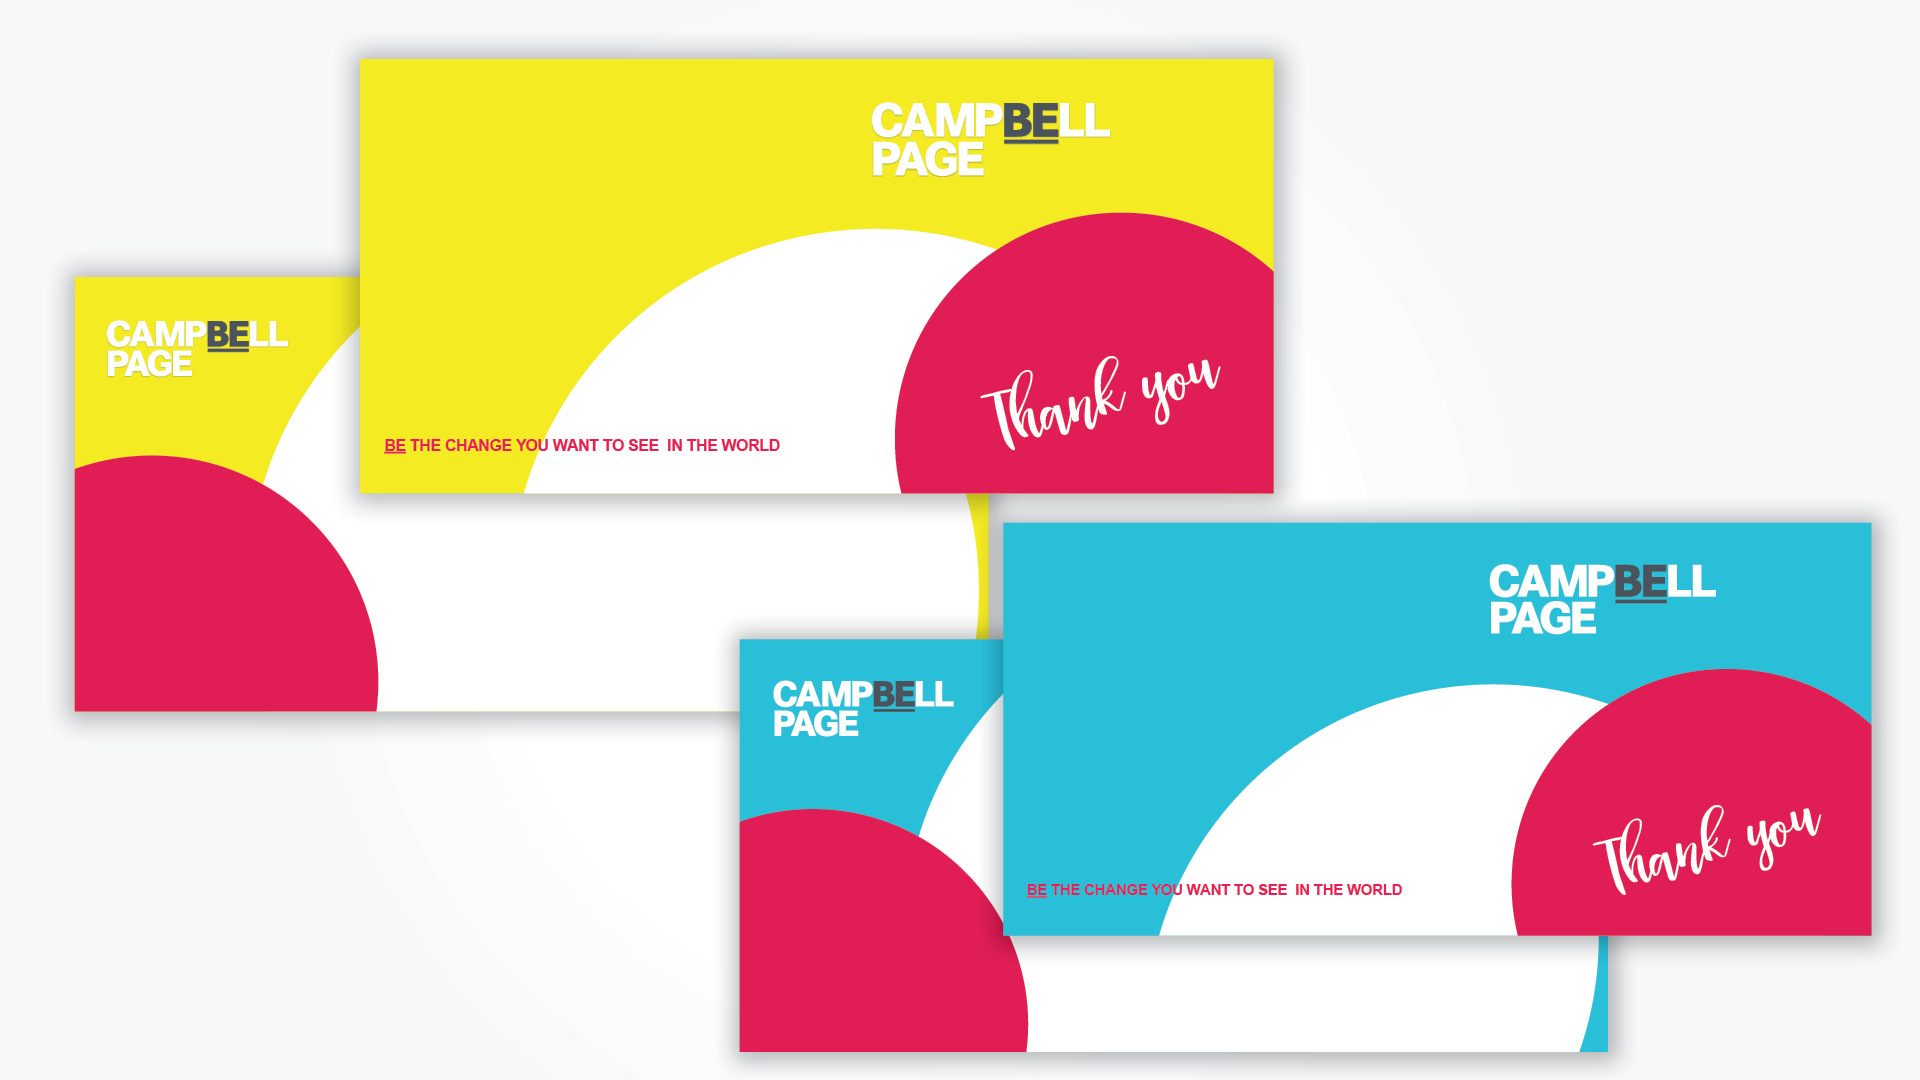 Campbell Page Brand Refresh and Rollout by Think Creative Agency6